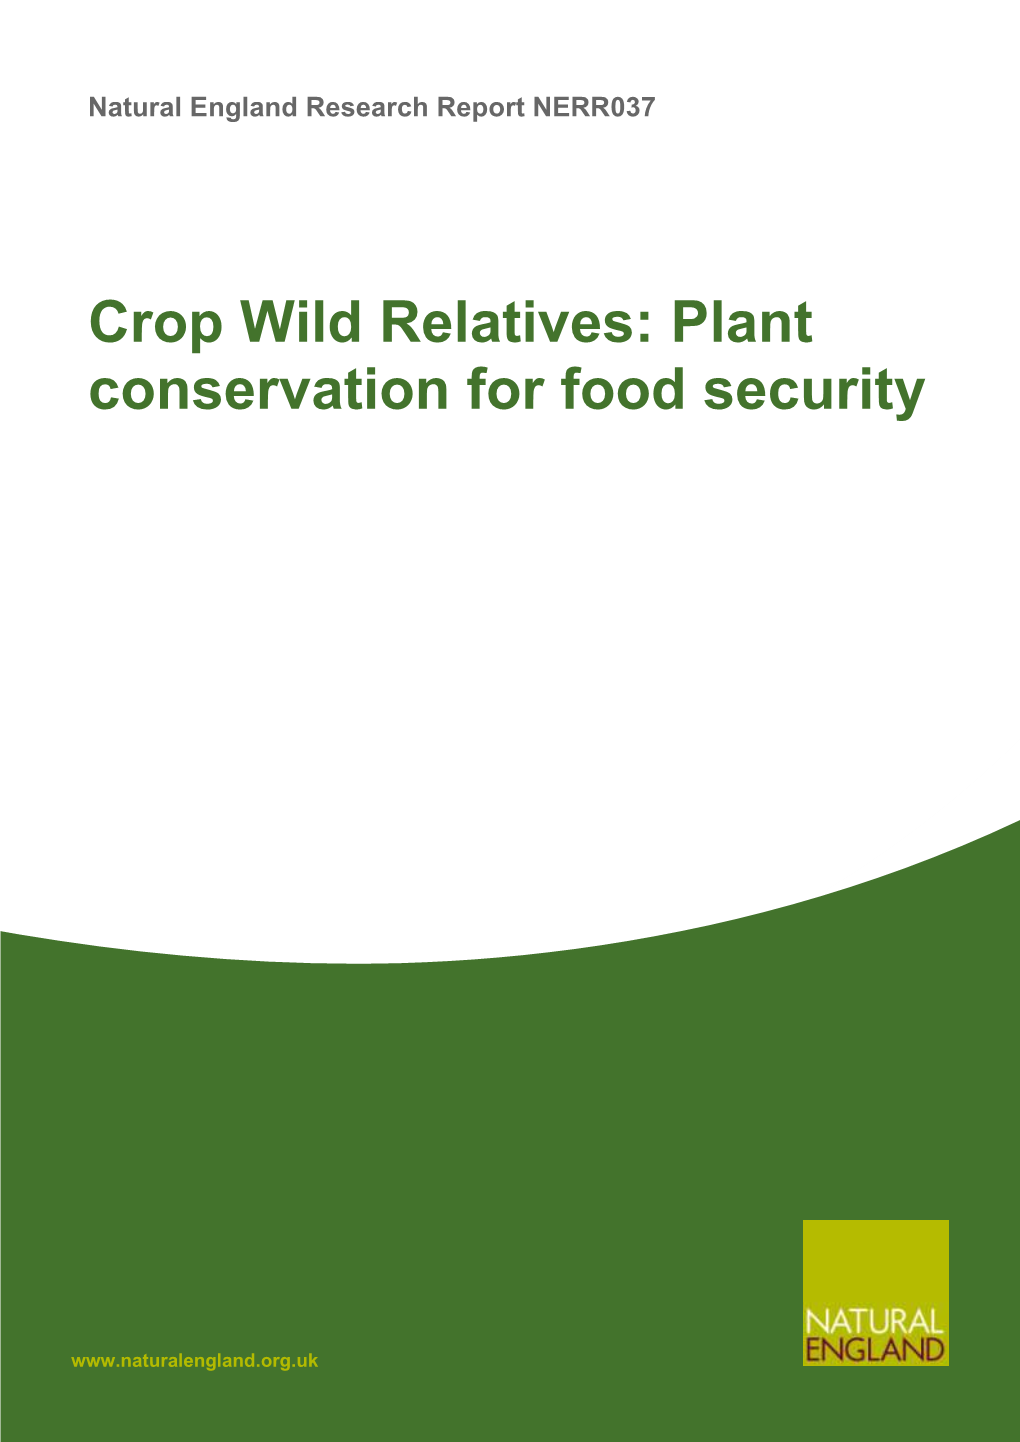 Crop Wild Relatives: Plant Conservation for Food Security